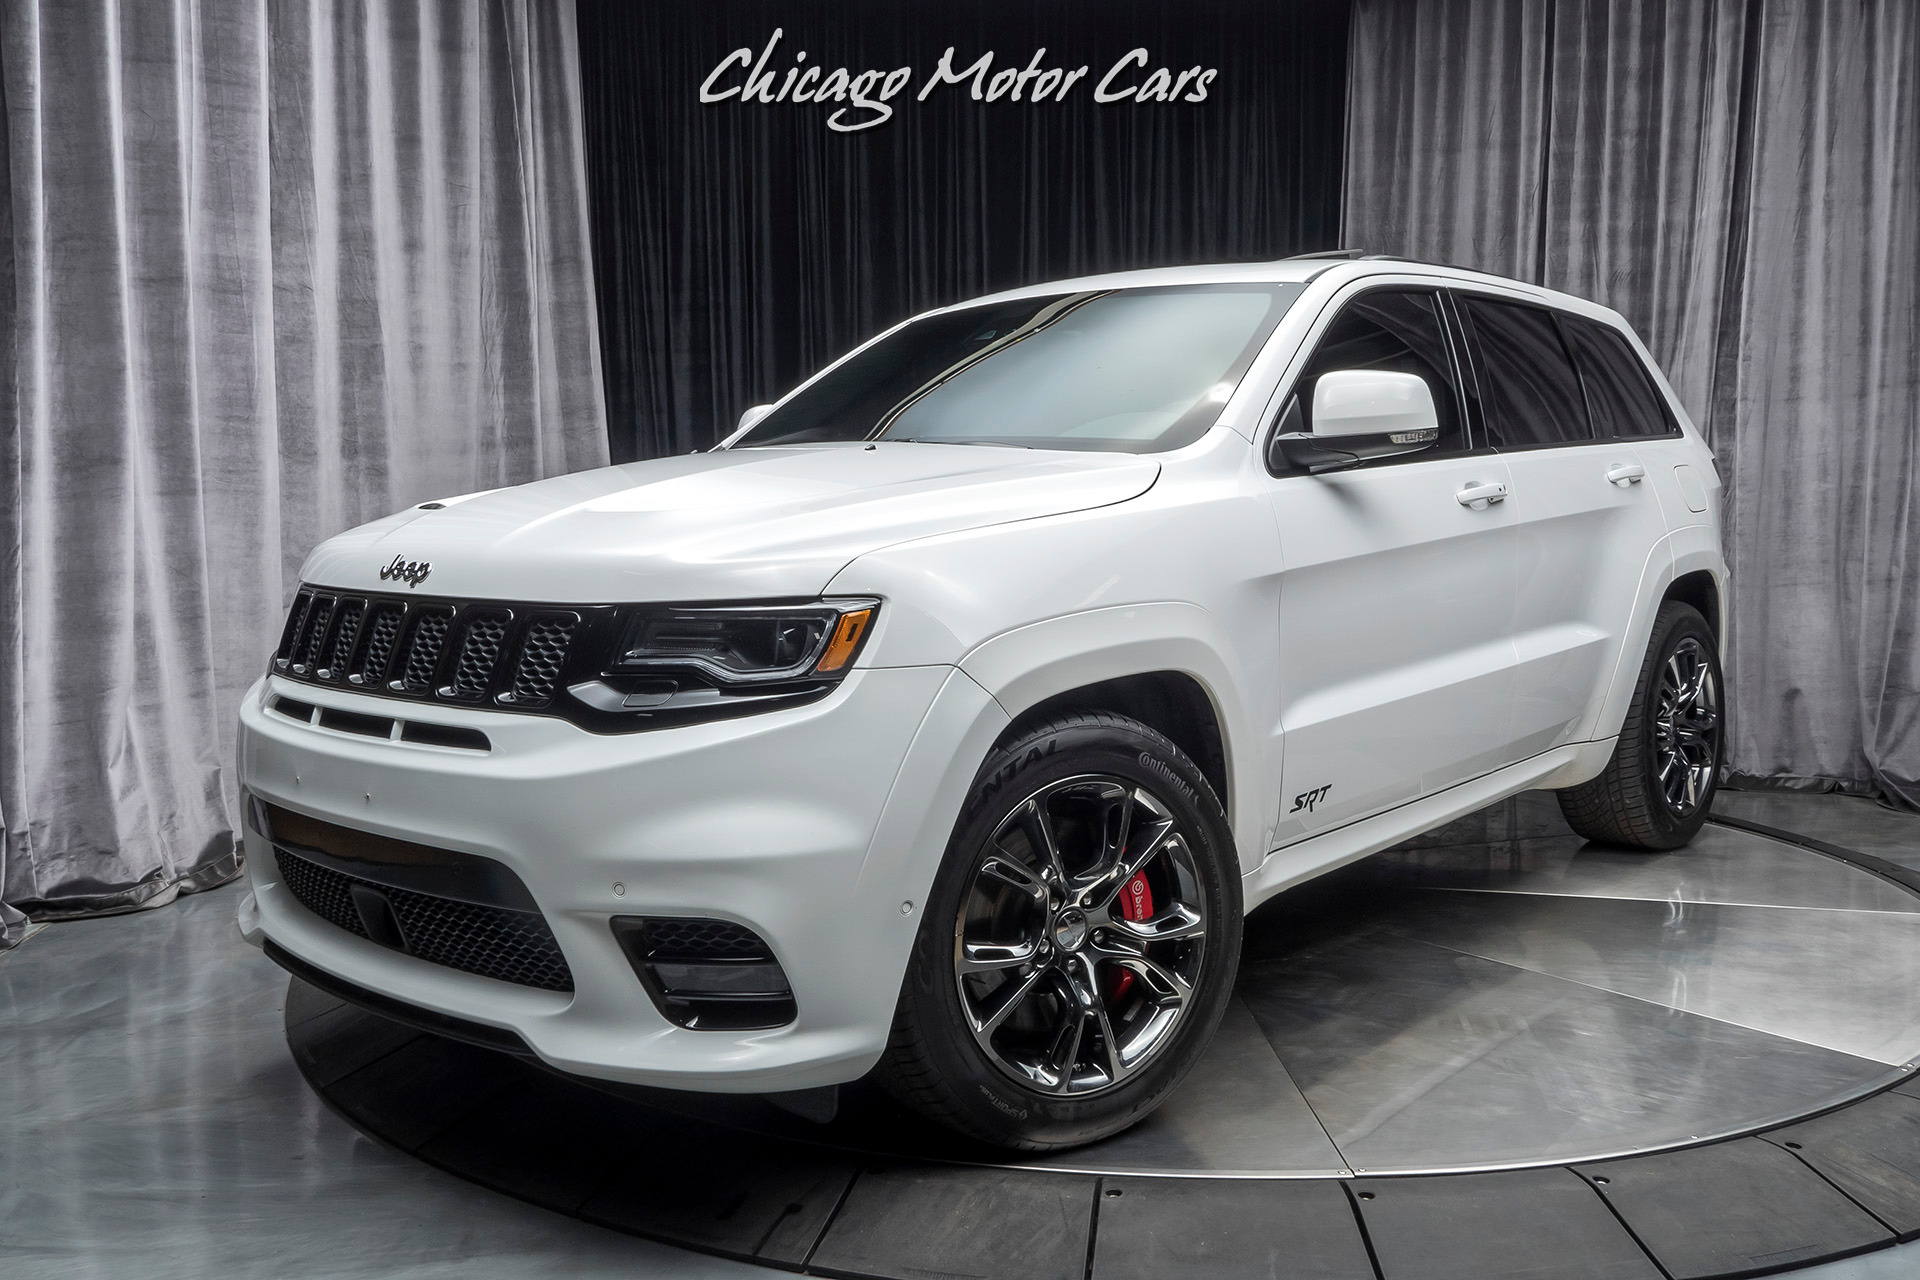 Used-2017-Jeep-Grand-Cherokee-SRT-SUV-MSRP-72K-HIGH-PERFORMANCE-AUDIO-RECENTLY-SERVICED